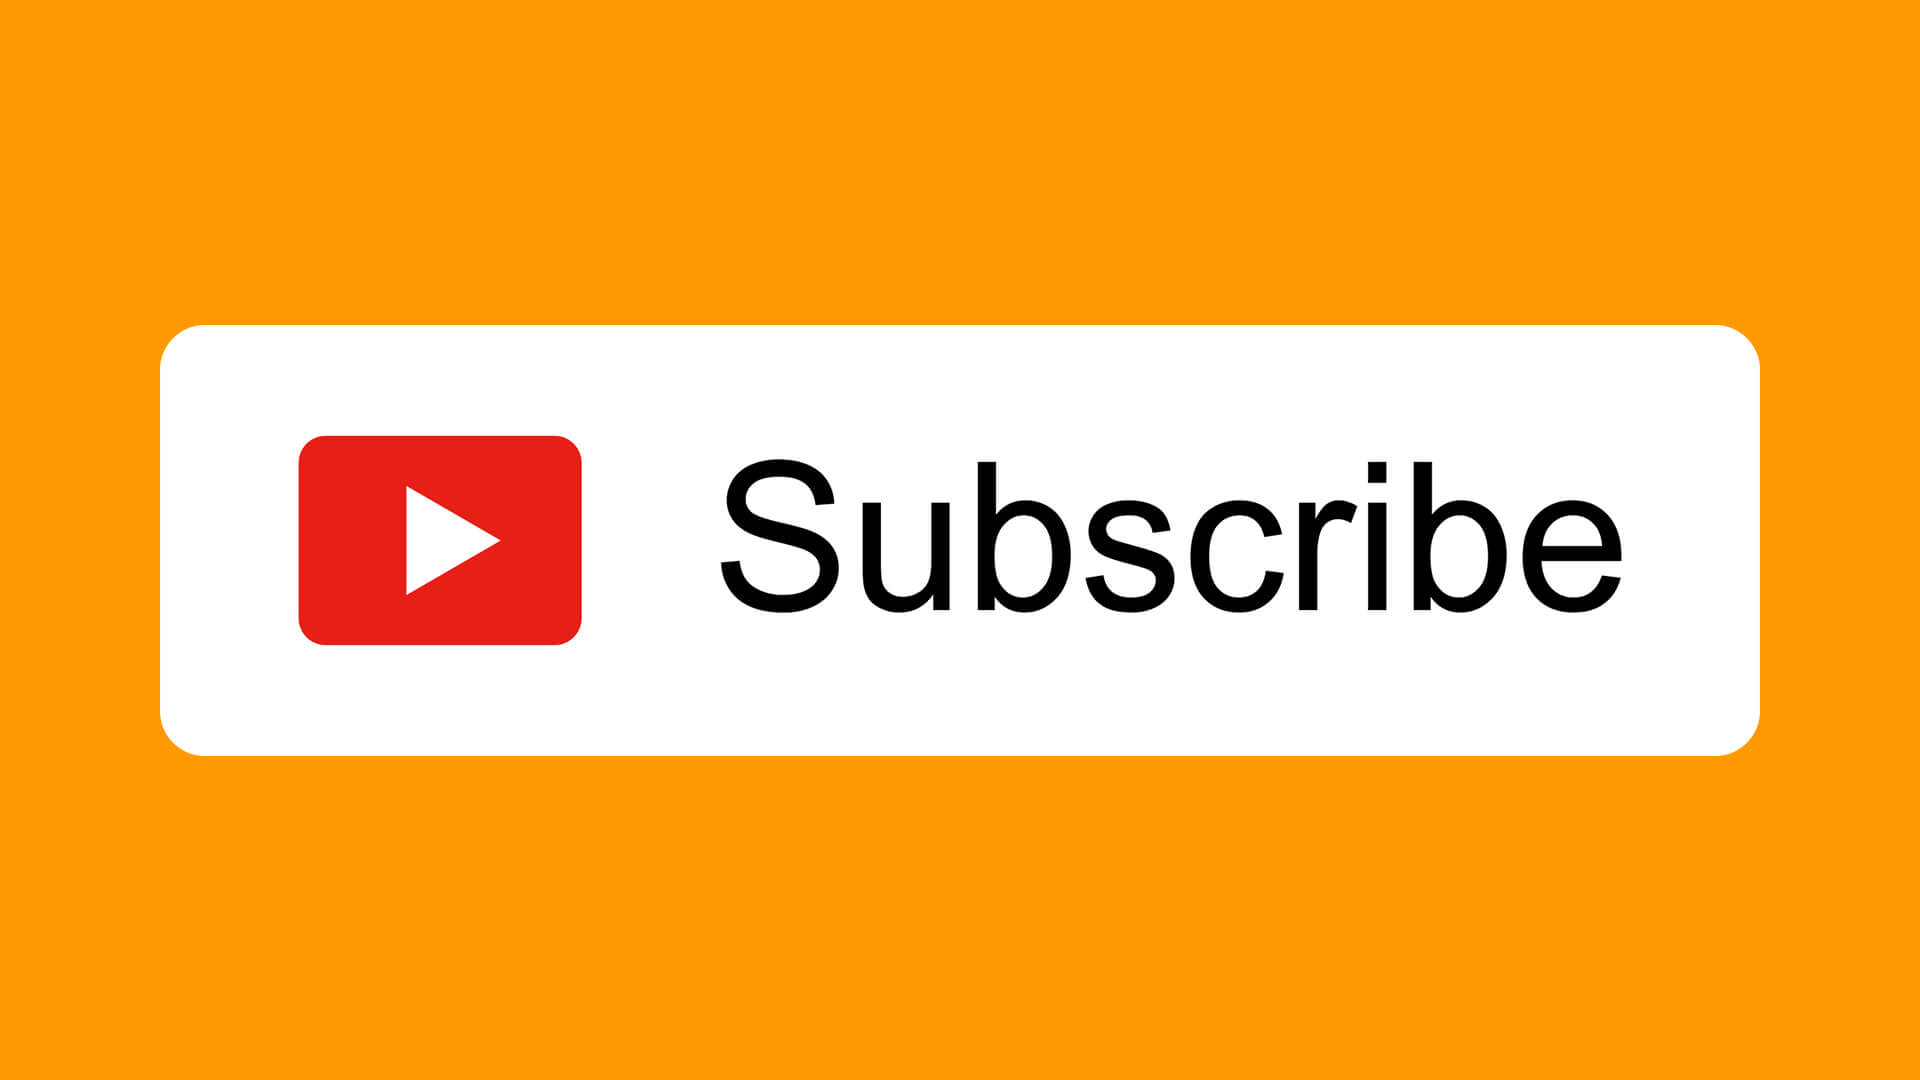 Free YouTube Subscribe Button Download Design Inspiration By AlfredoCreates 10 1